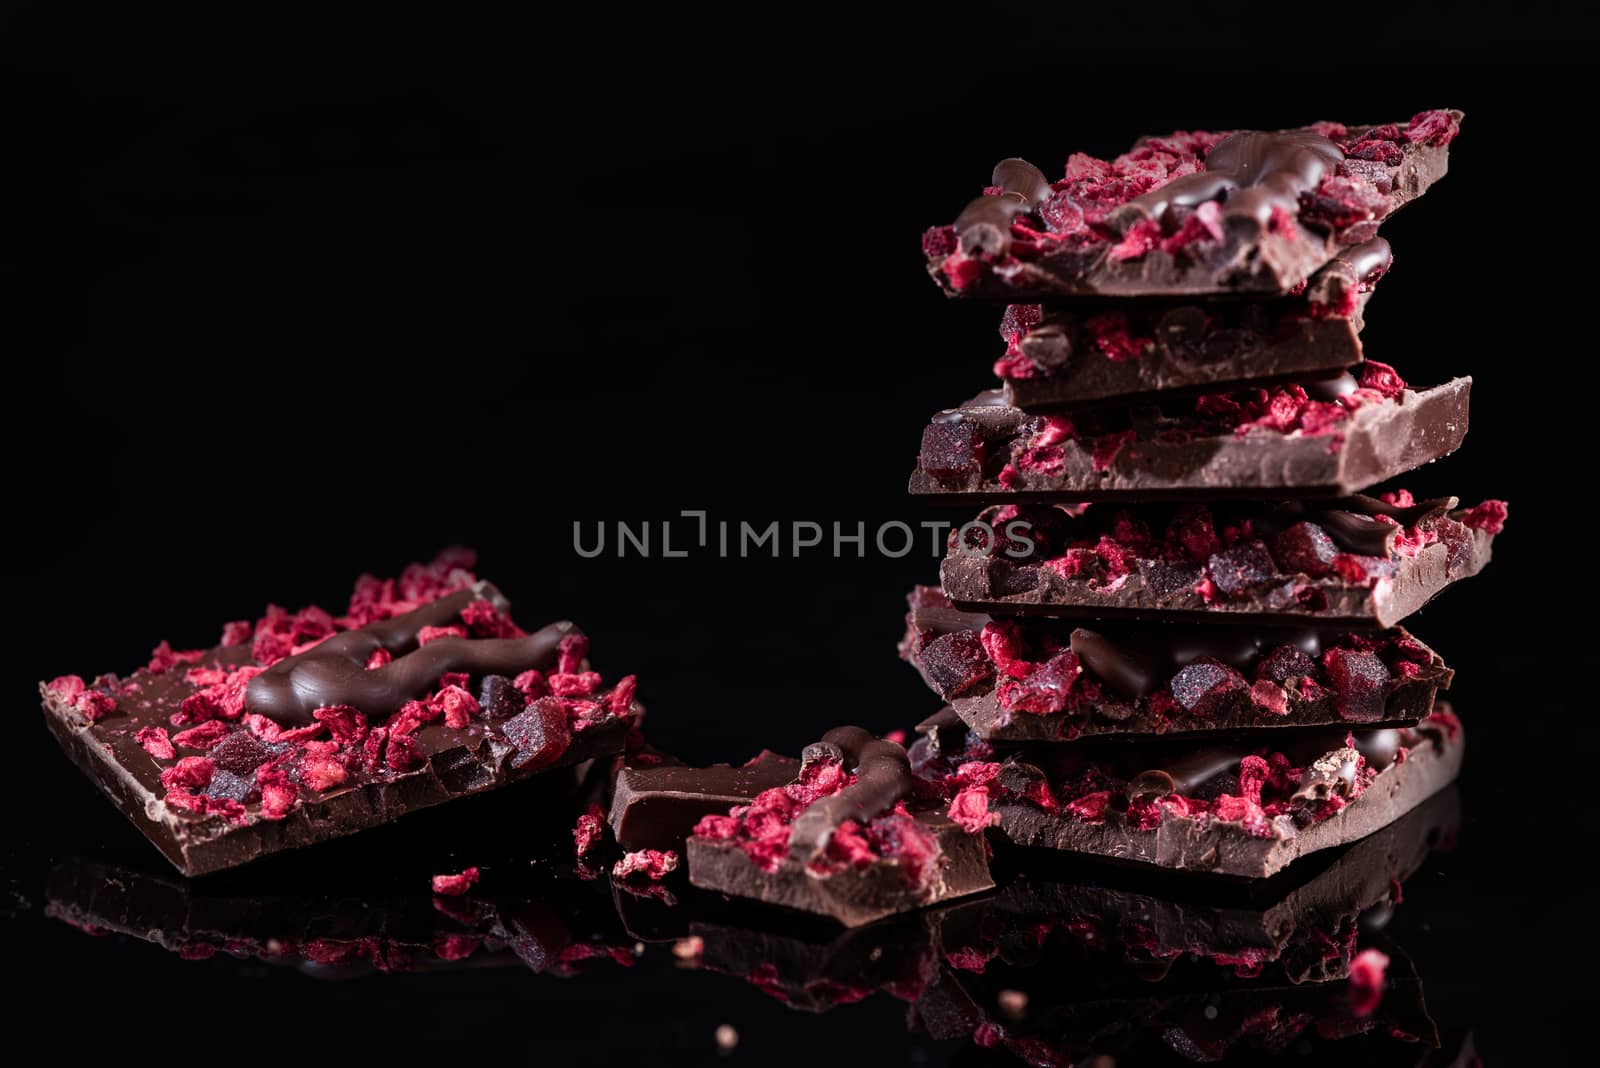 Stack of Broken Chocolate Pieces on Black Background. Copy Space. Closeup View.